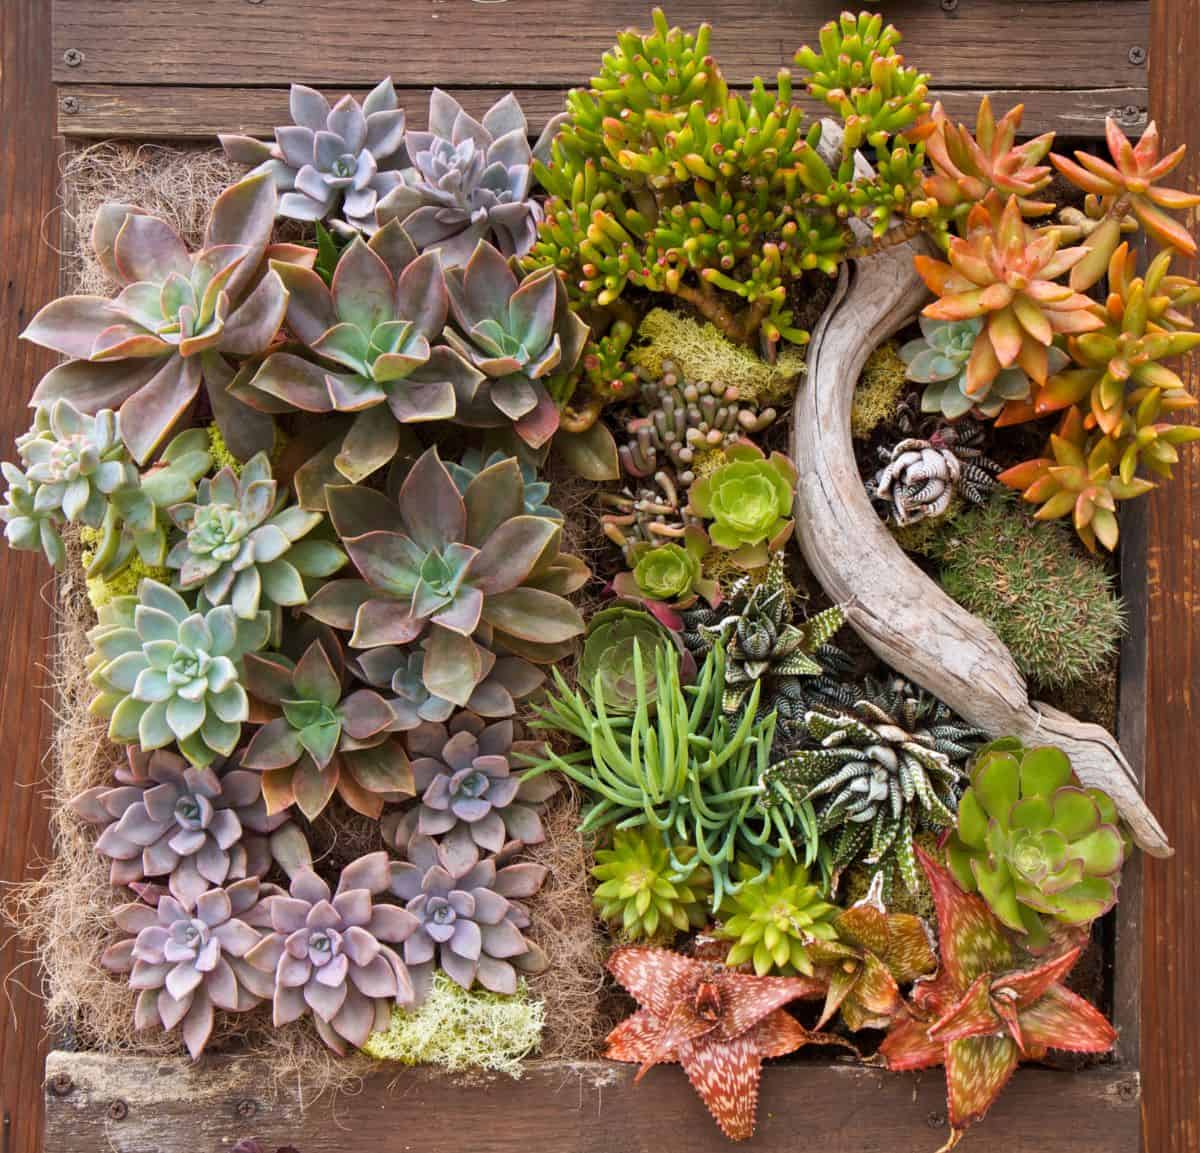 DIfferent varieties of succulents on a wooden planter.